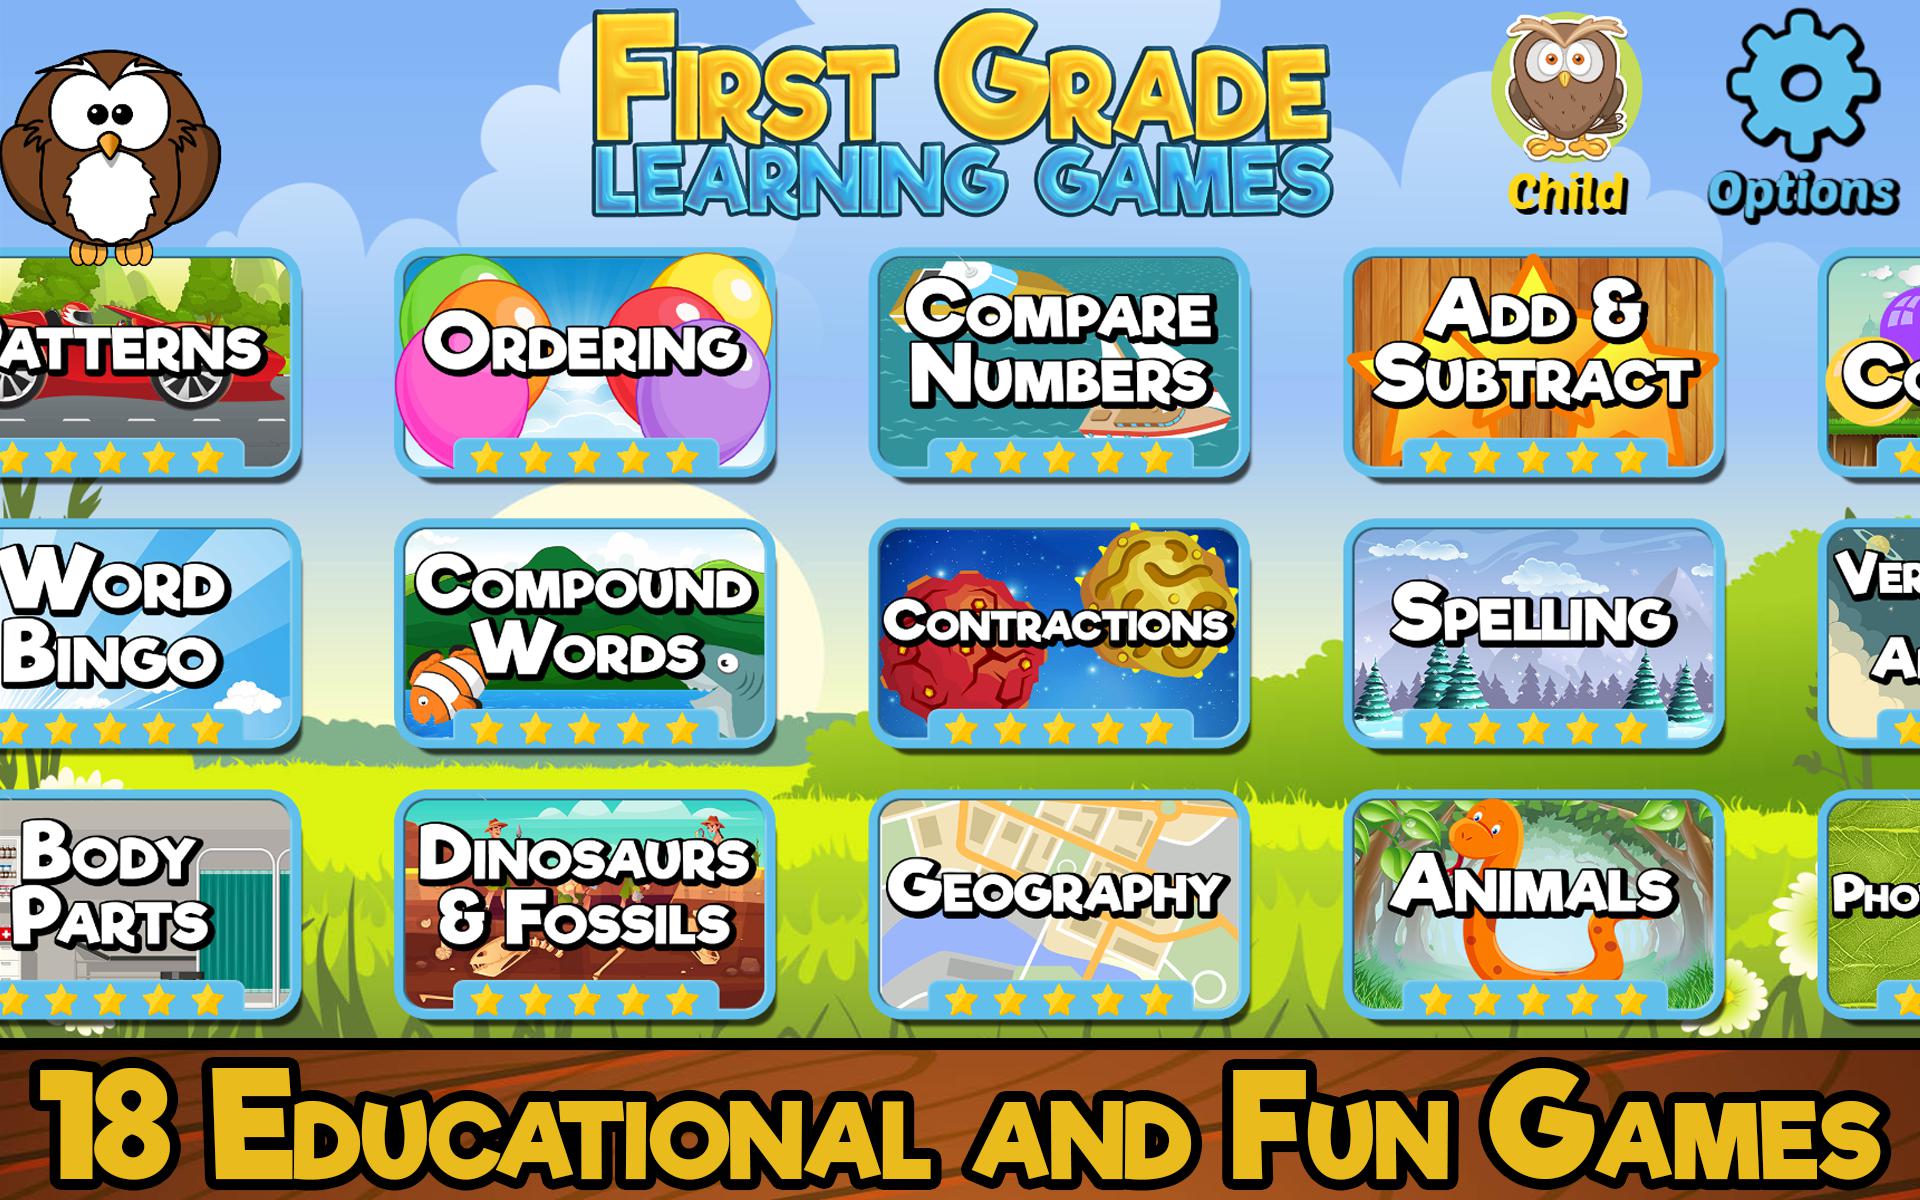 First Grade Learning Games (School Edition)